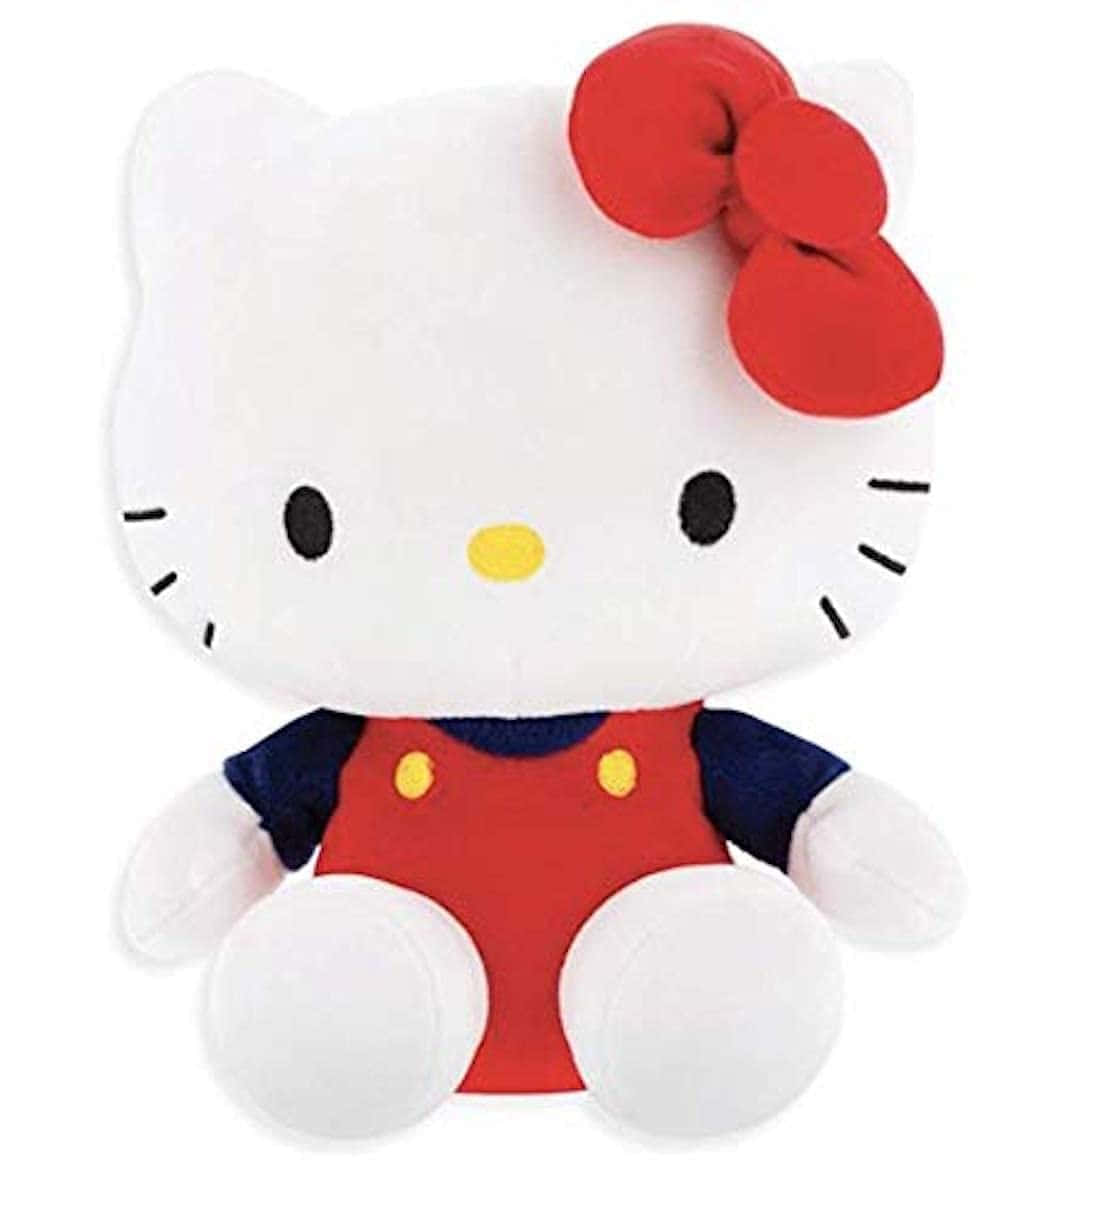 Put a smile on with Hello Kitty!